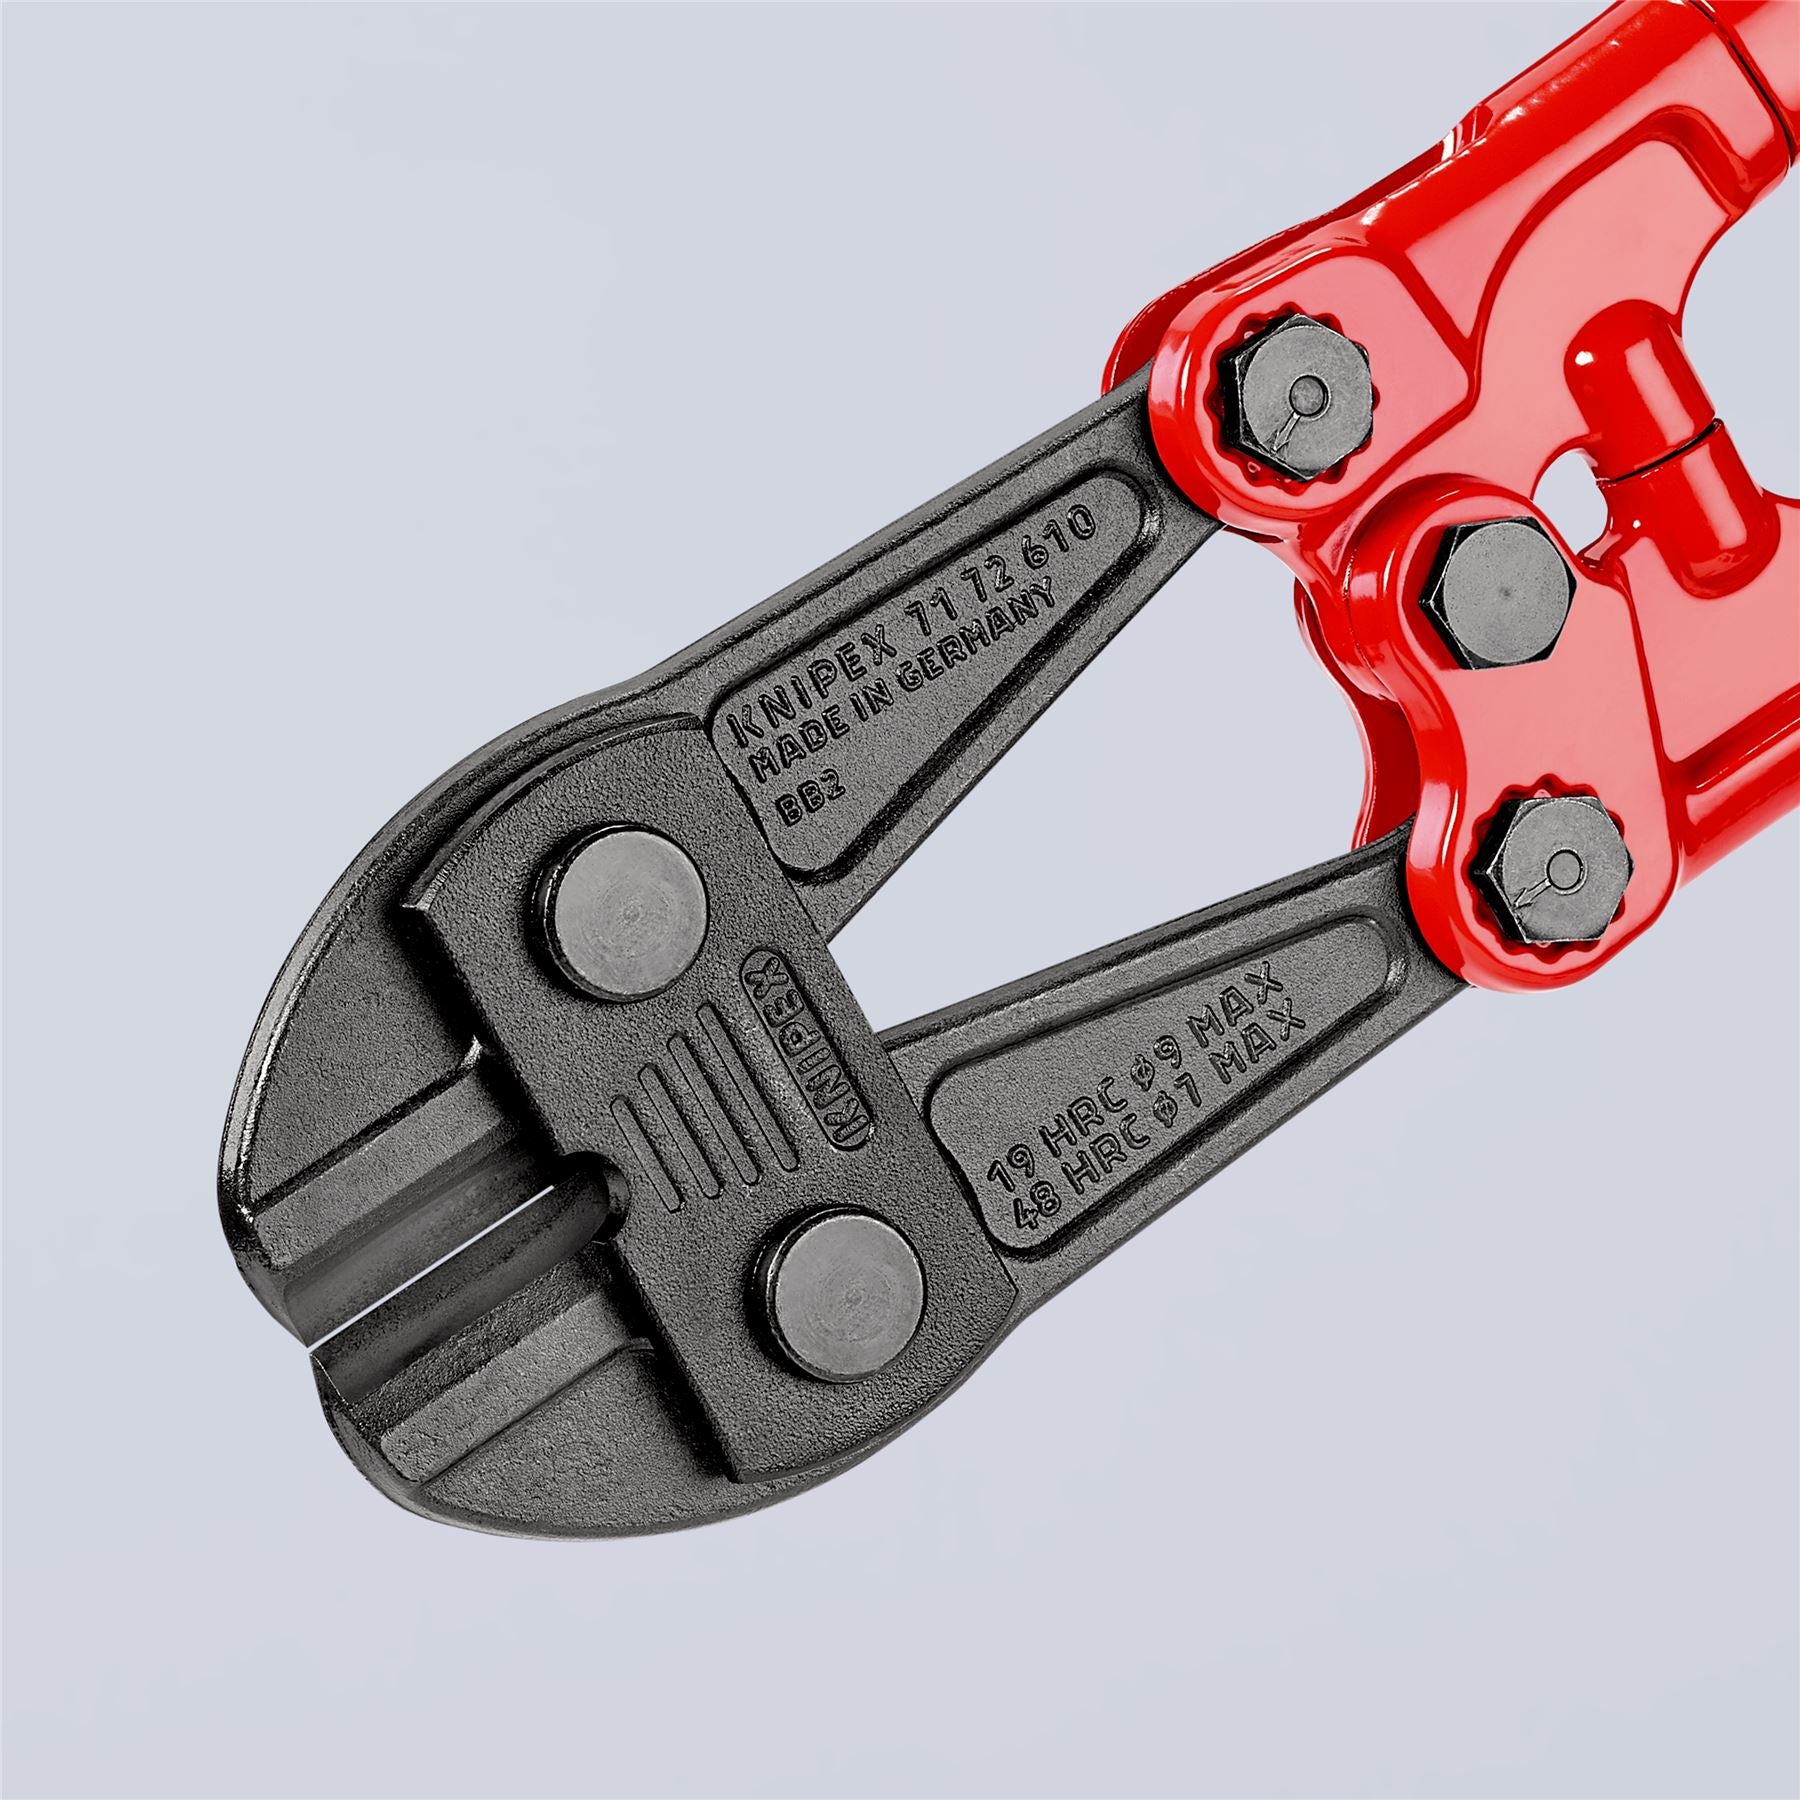 Knipex Bolt Cutter 610mm Multi Component Grips 71 72 610